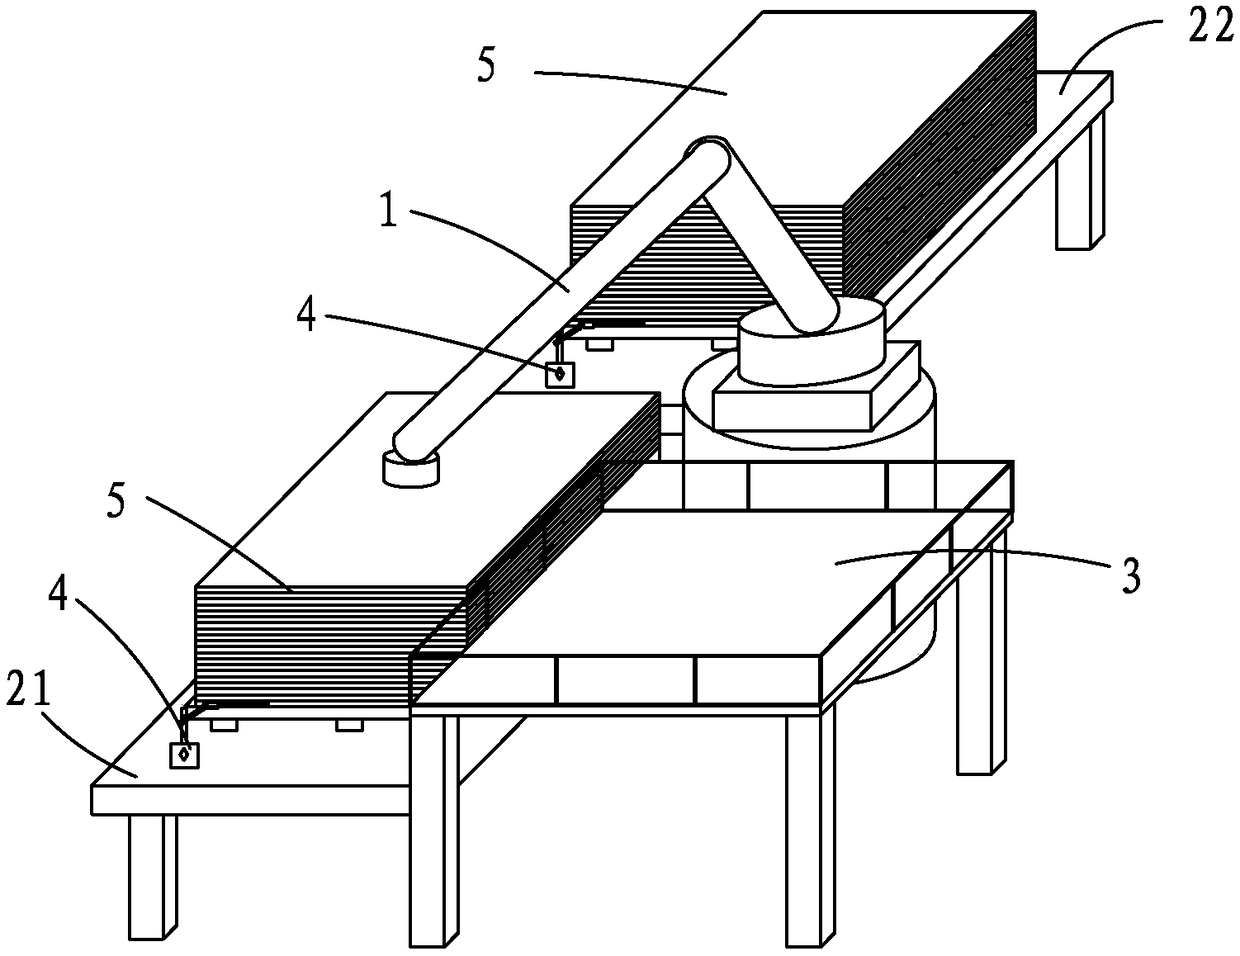 Steel plate material tailpiece automatic identifying and dispensing system